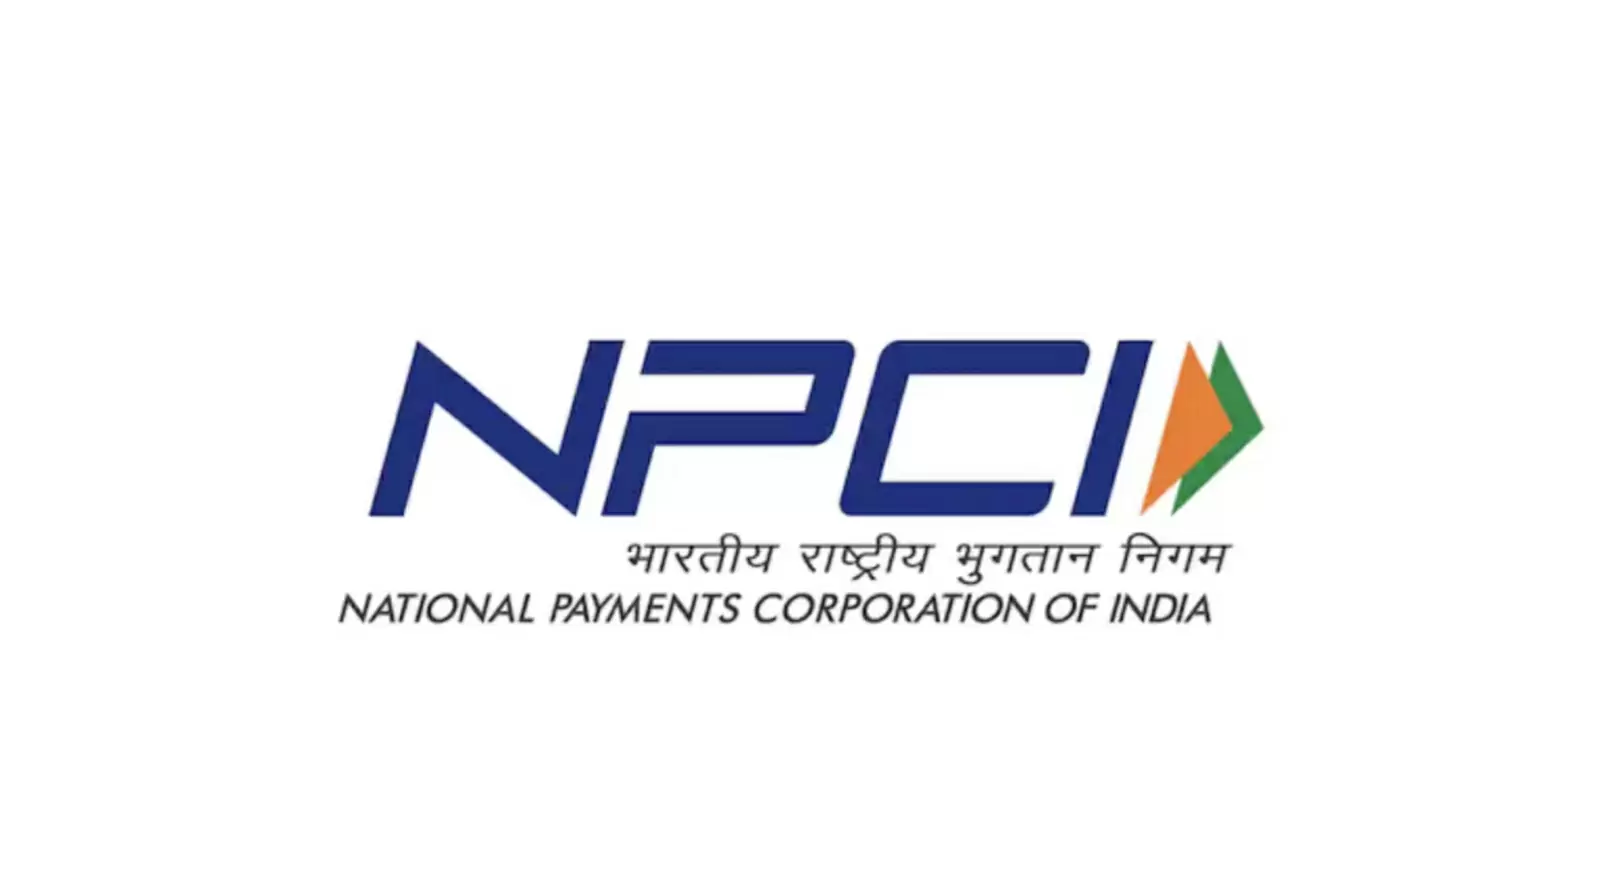 NPCI will do research on Blockchain and AI Tech in collaboration with IISc